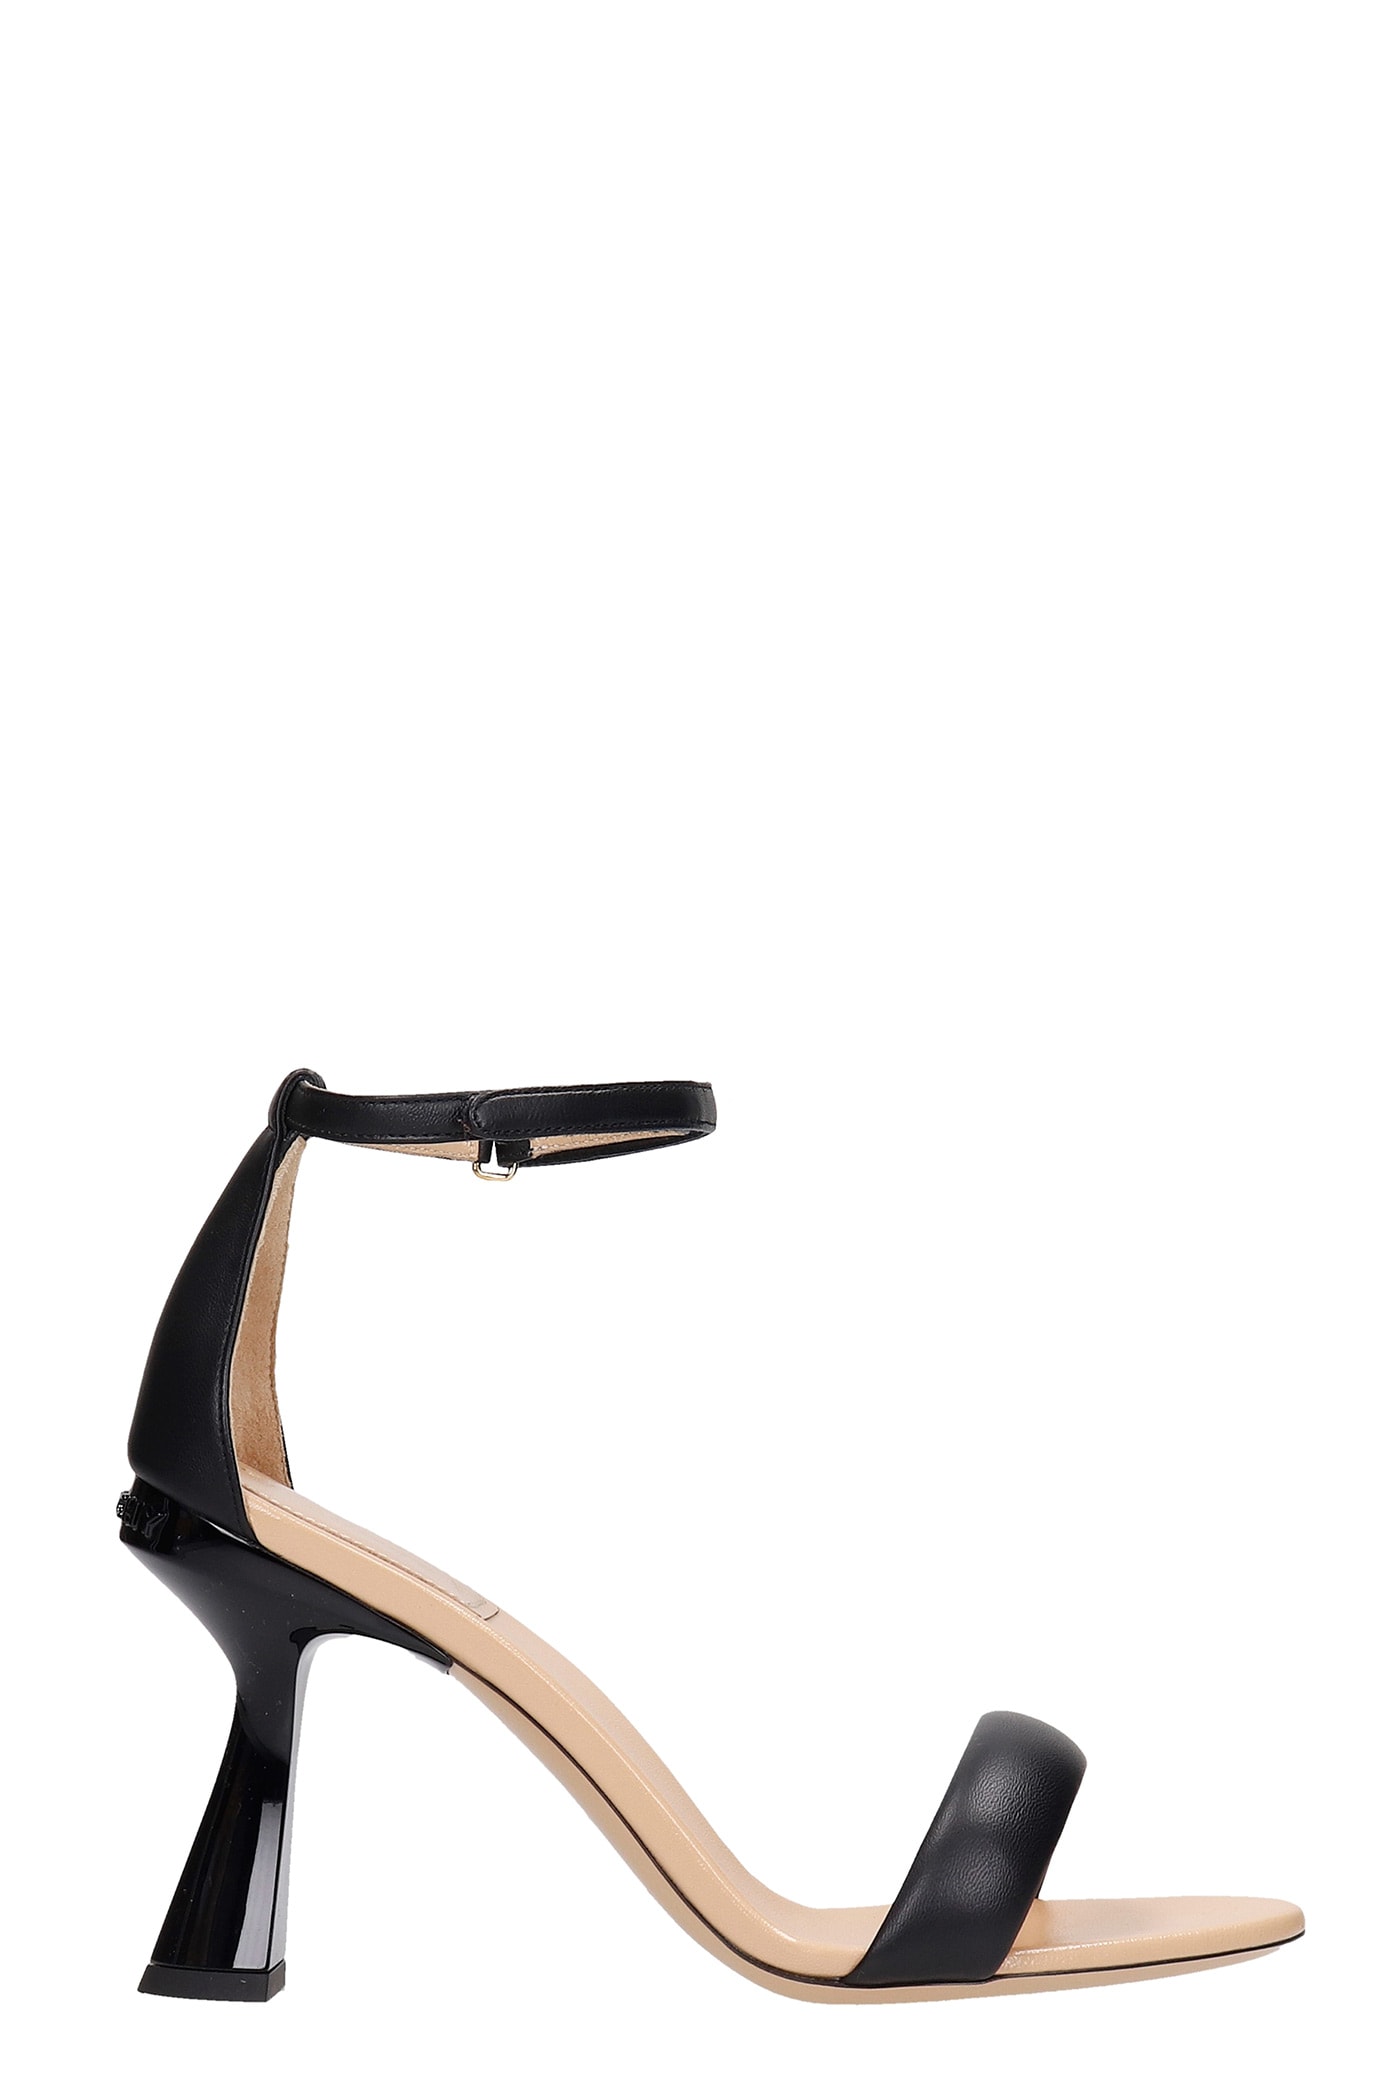 Buy Givenchy Carene Sandals In Black Leather online, shop Givenchy shoes with free shipping